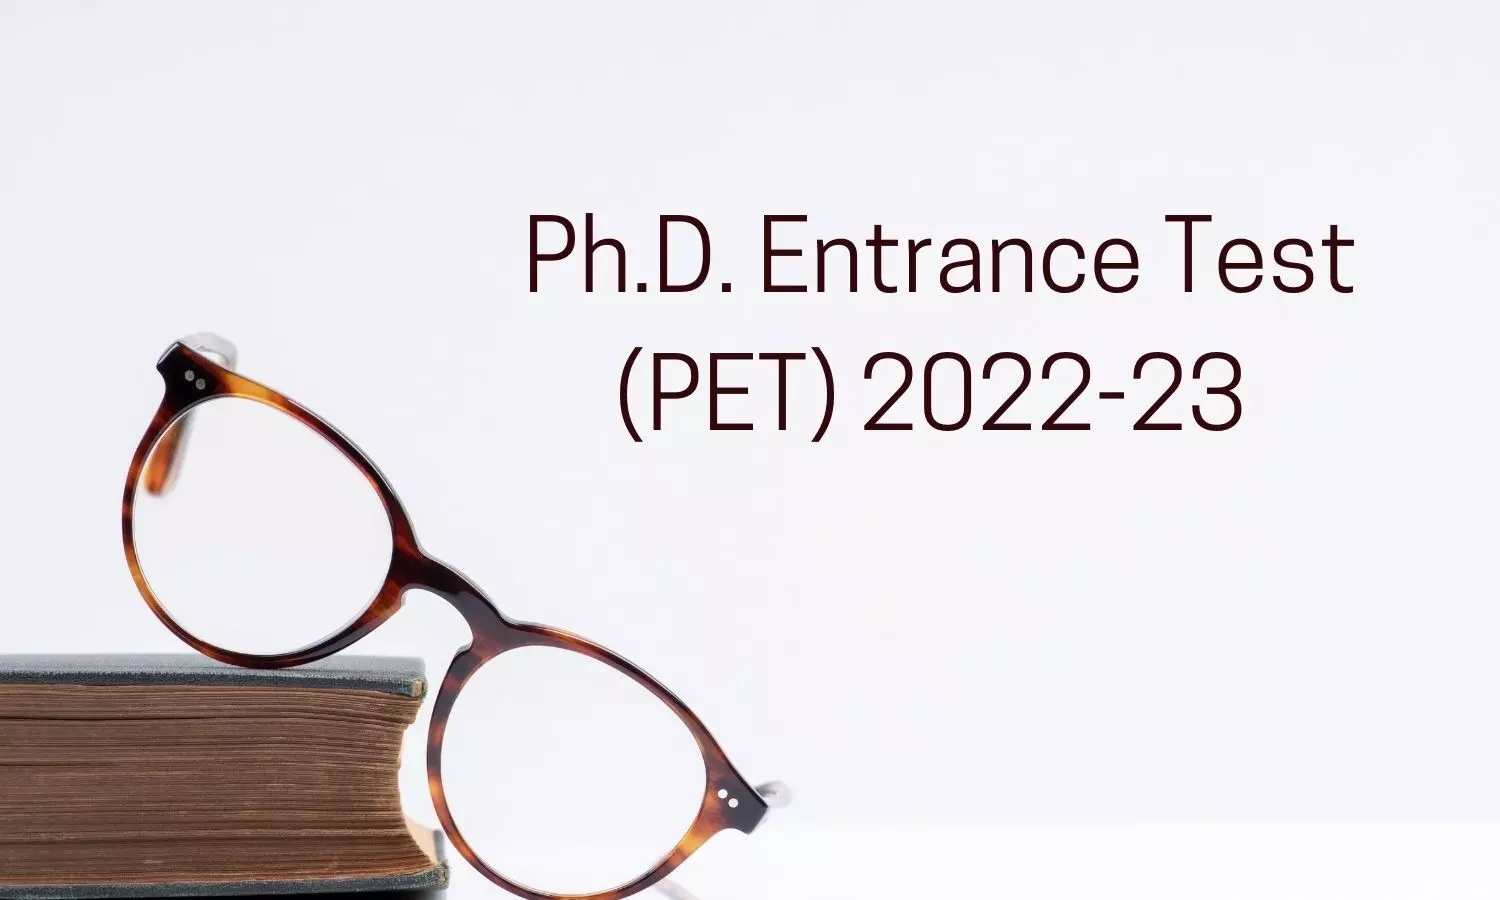 MUHS invites applications for PhD Entrance Test, PET 2022-23, Check out eligibility criteria, schedule, fee, exam pattern, all details here